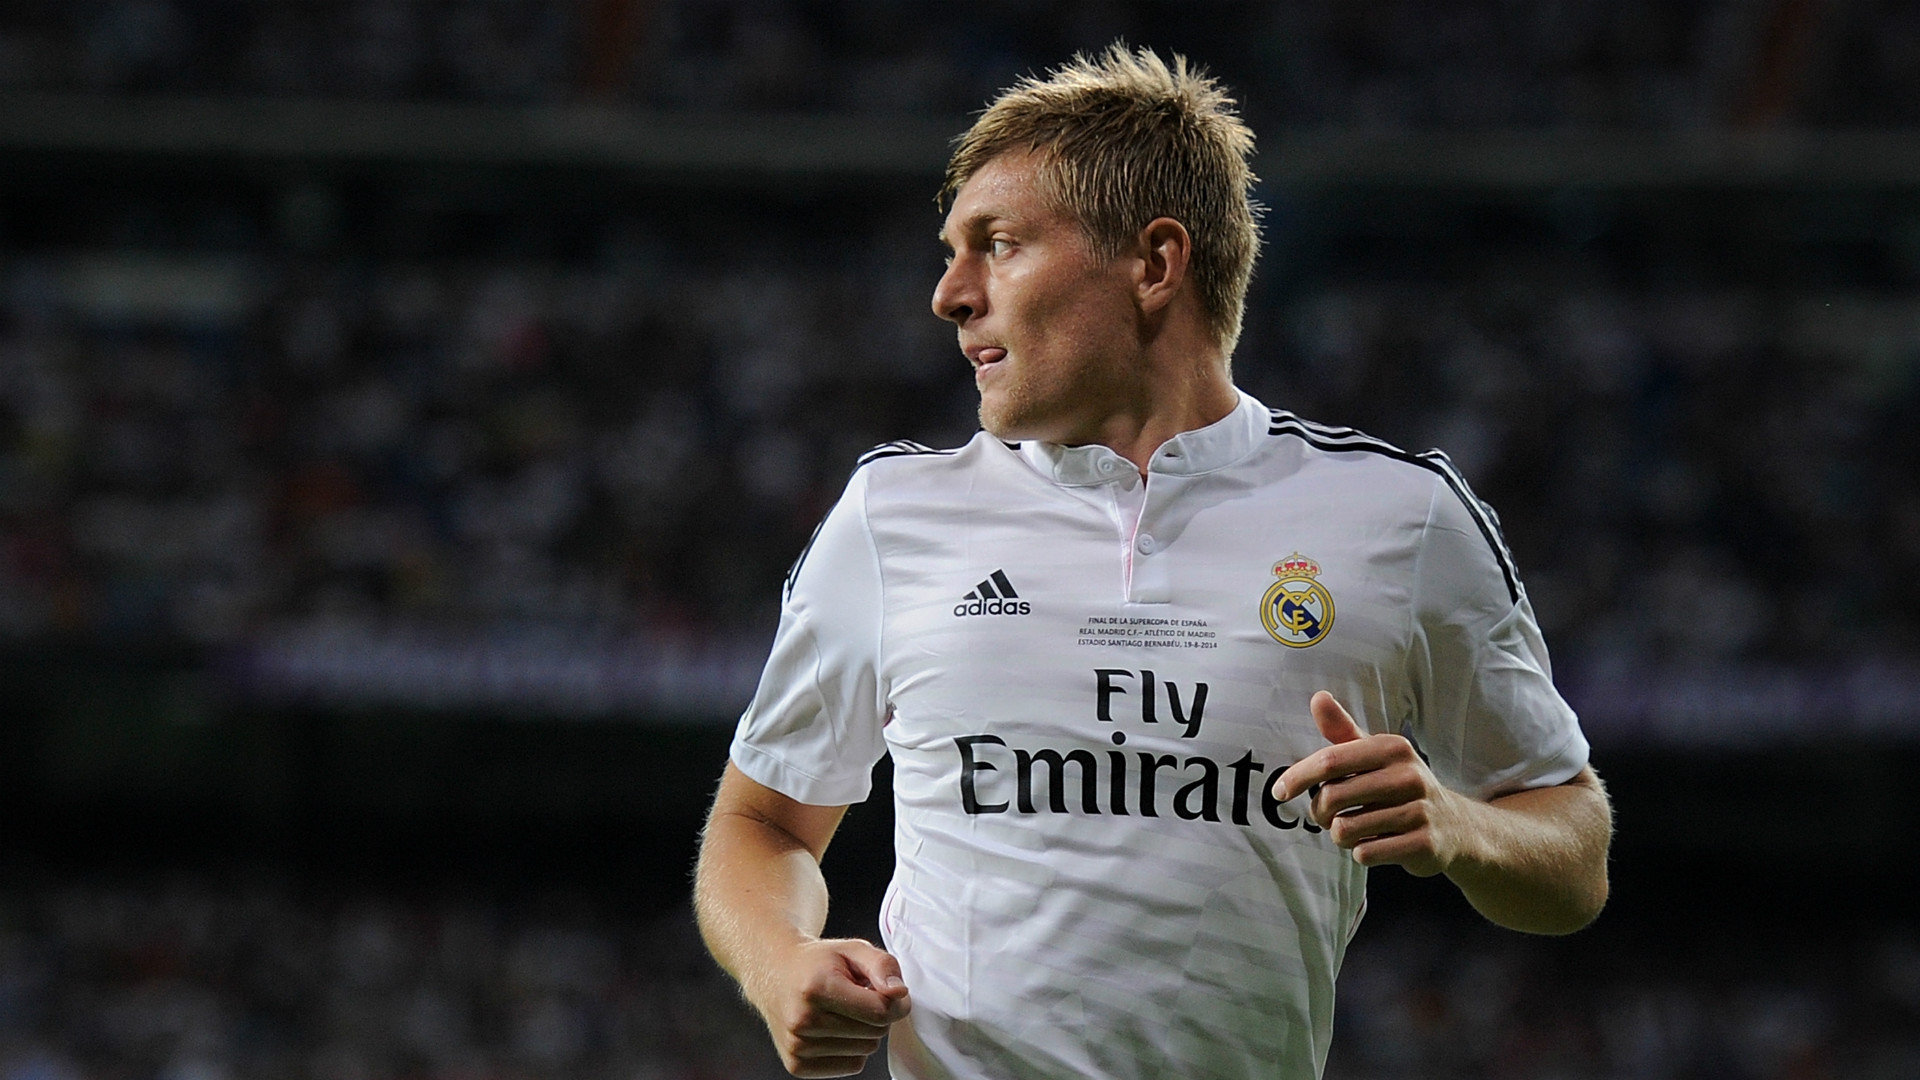 Toni Kroos Wallpapers Images Photos Pictures Backgrounds